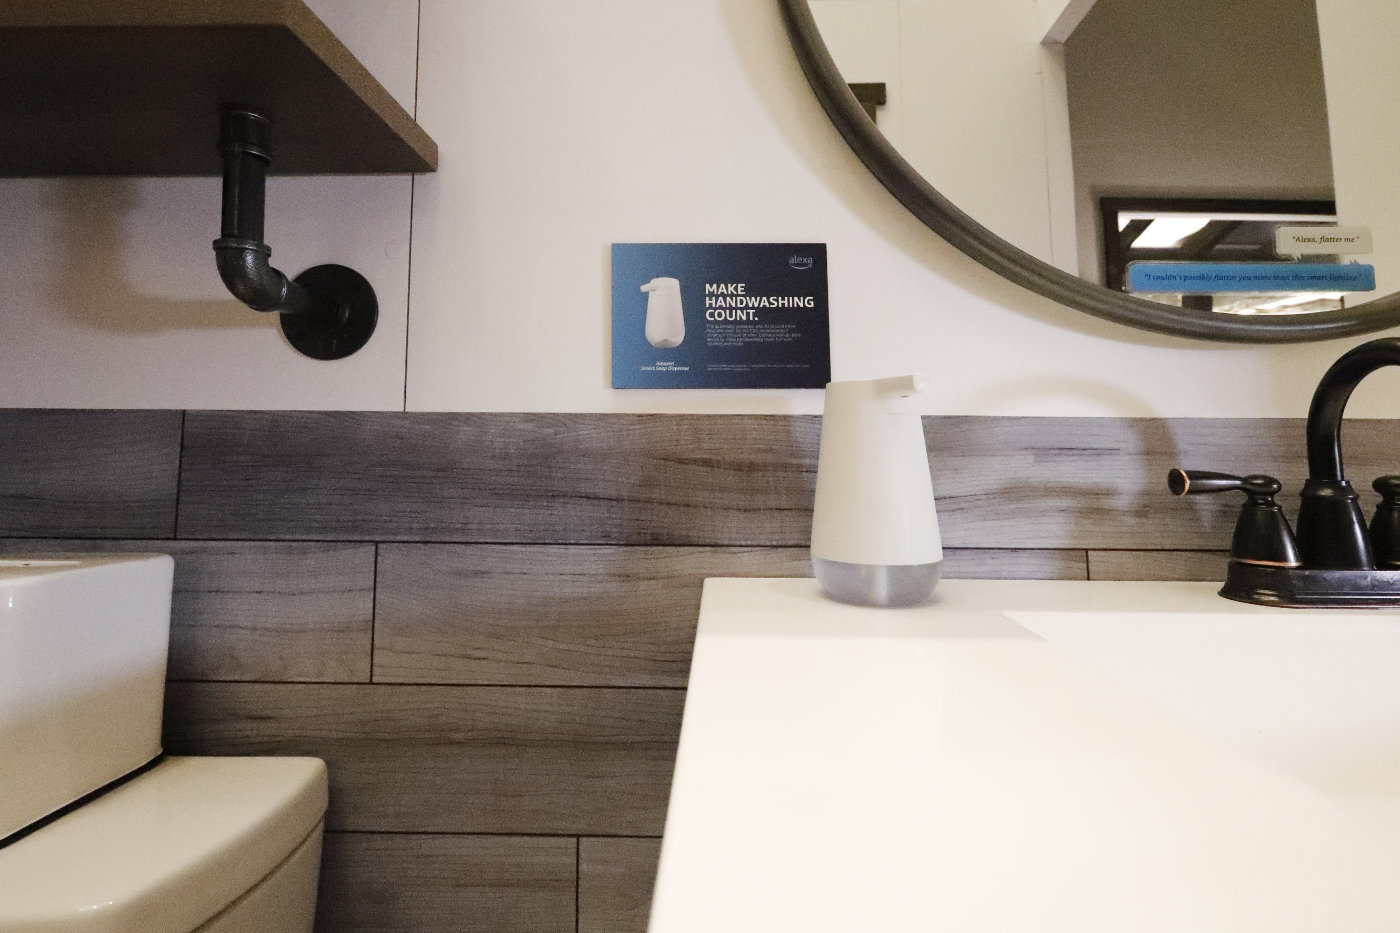 A automatic soap dispenser that tells you how long to wash your hands